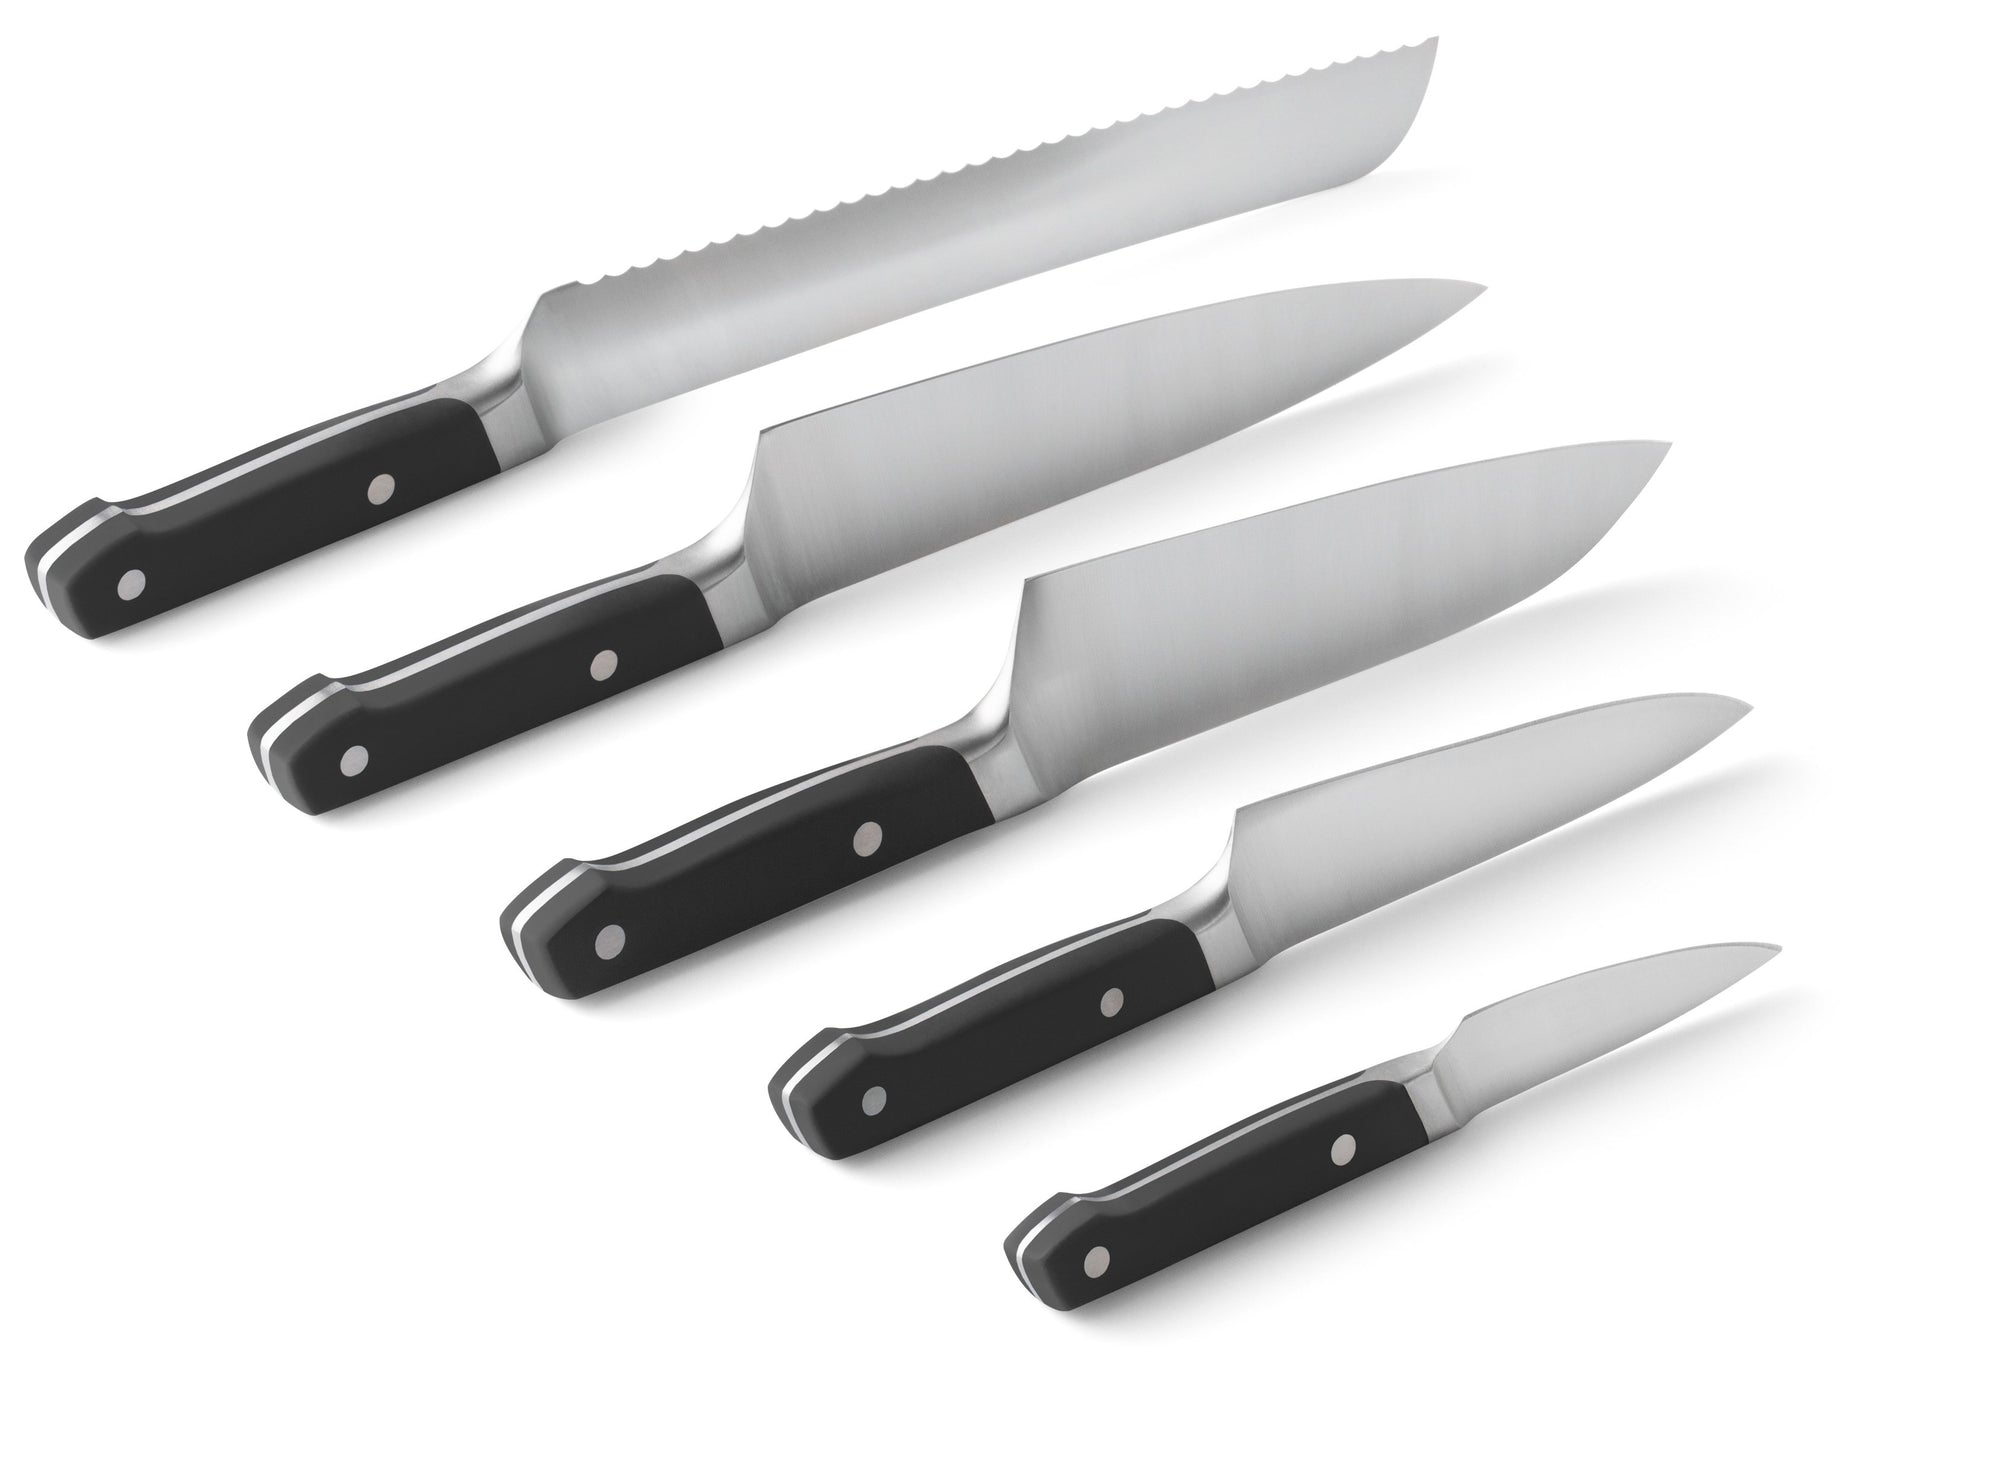 Five types of kitchen knives